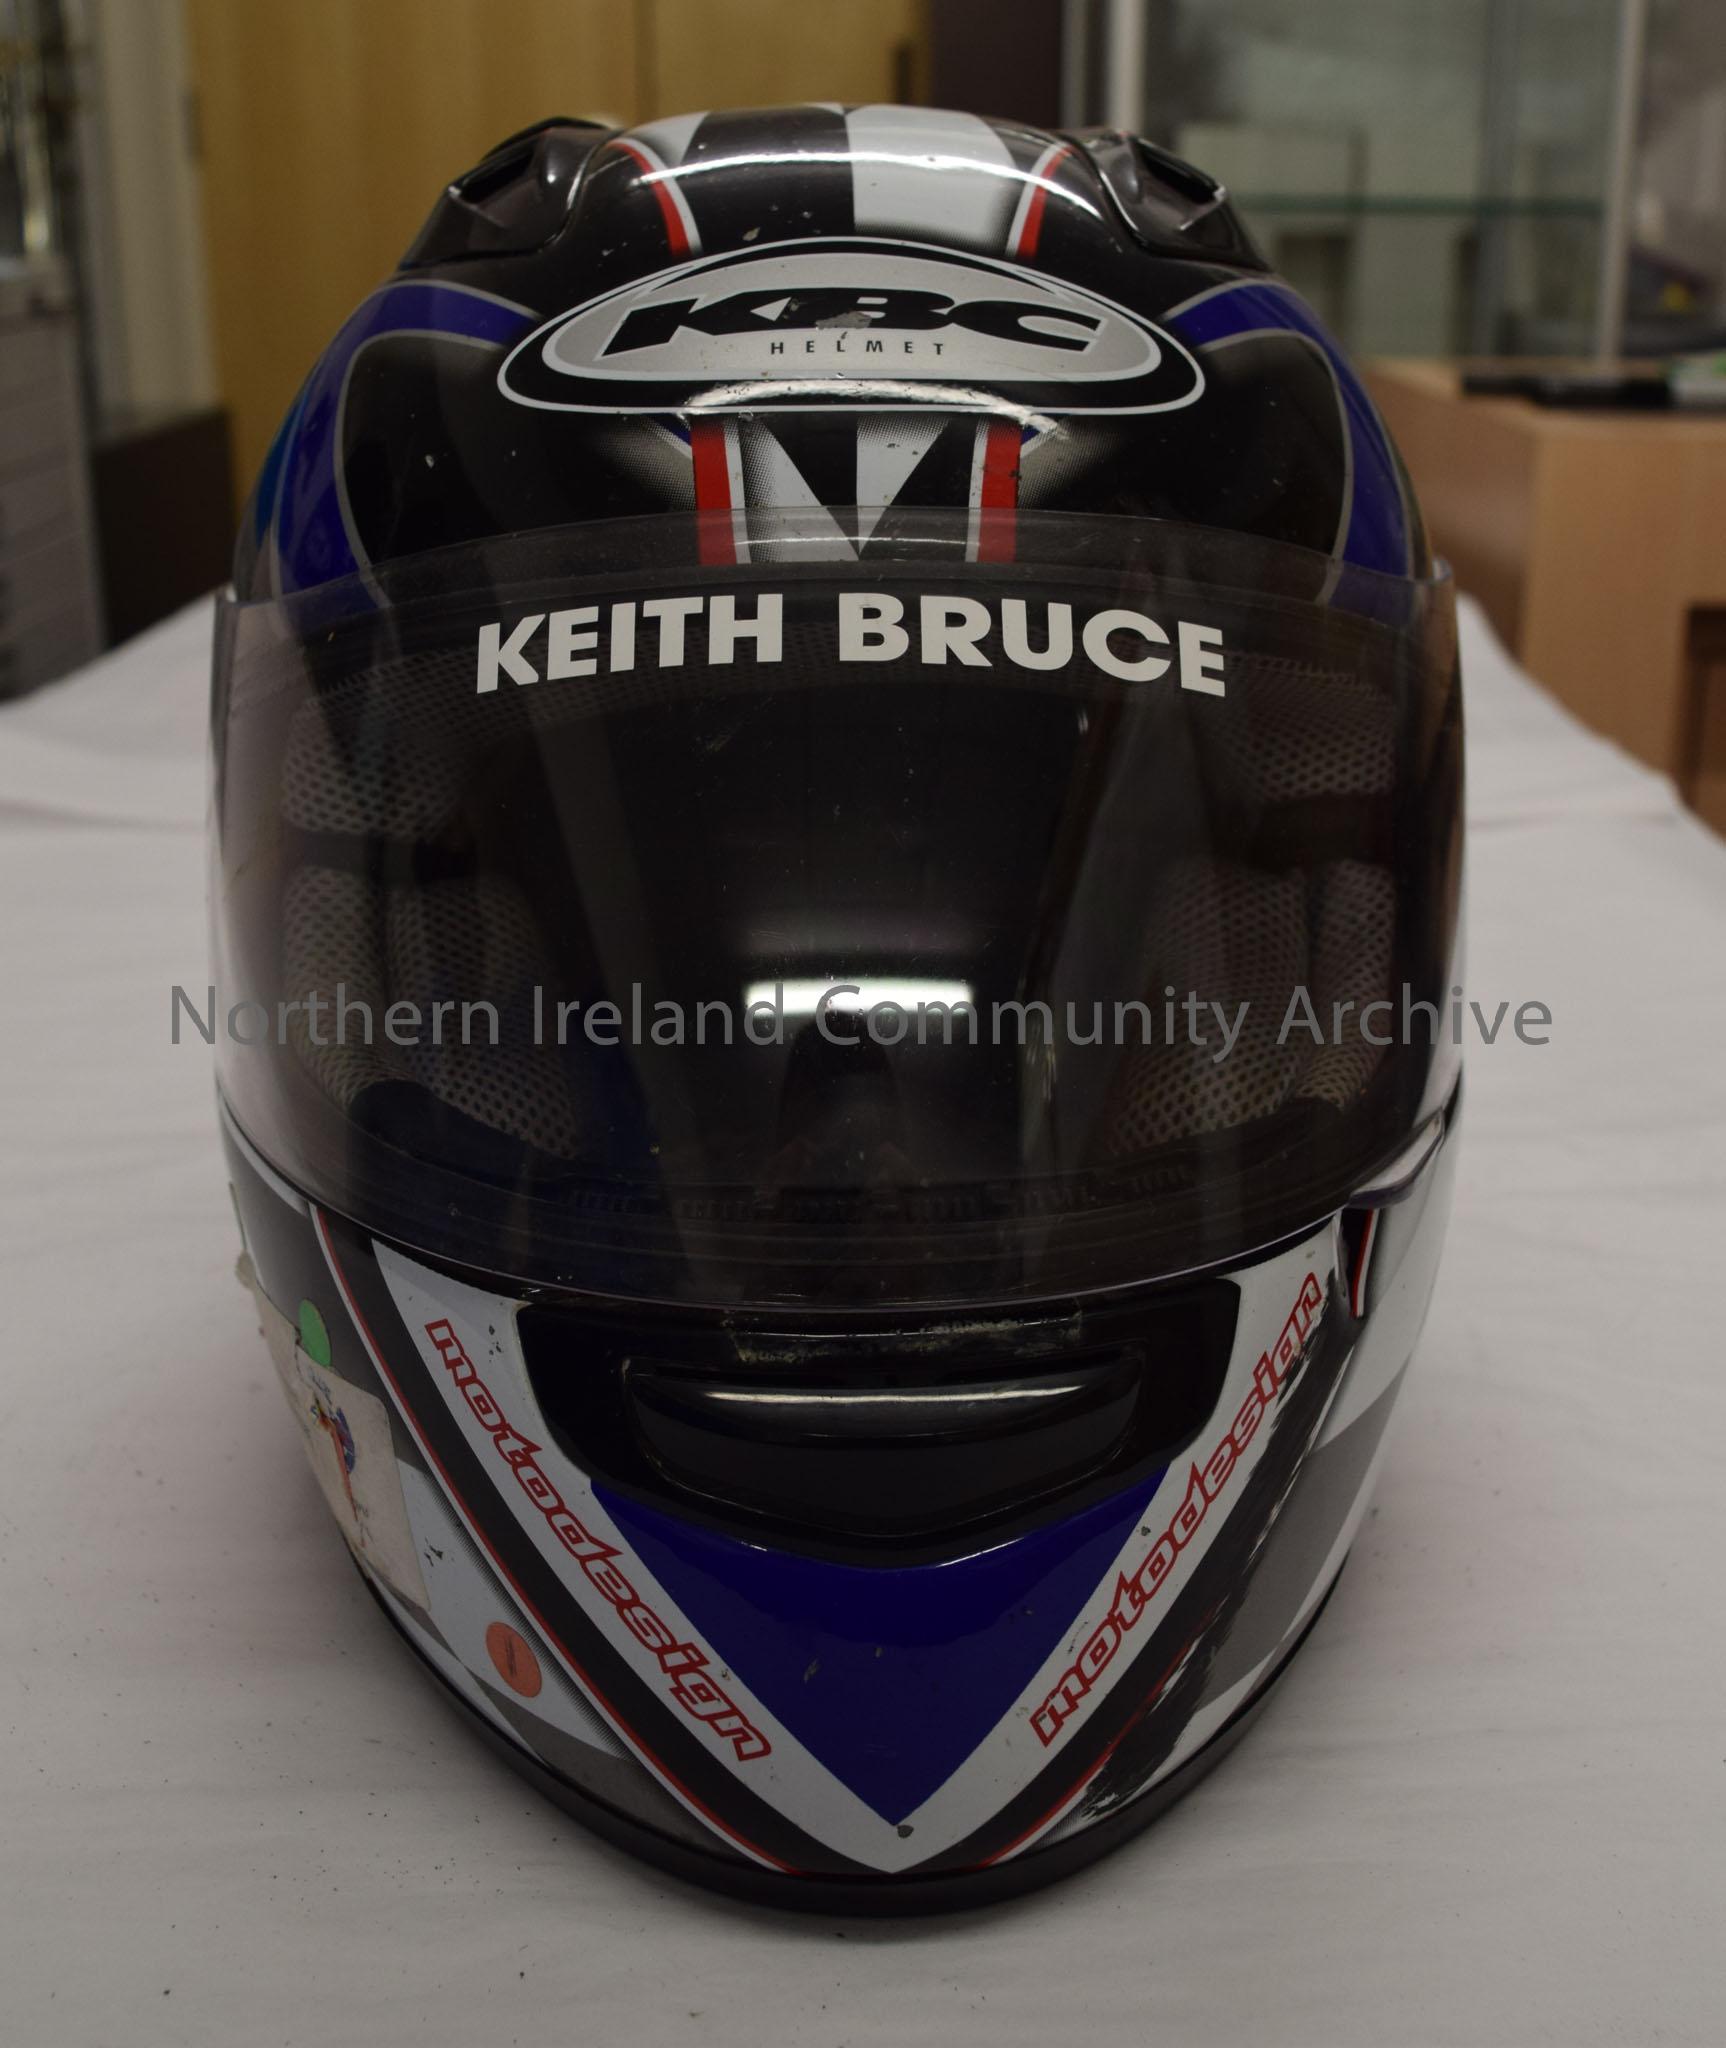 KBC motorcycle helmet belonging to Keith Bruce. Black and white chequered pattern with blue and red stripes. – 2016.75 (2)